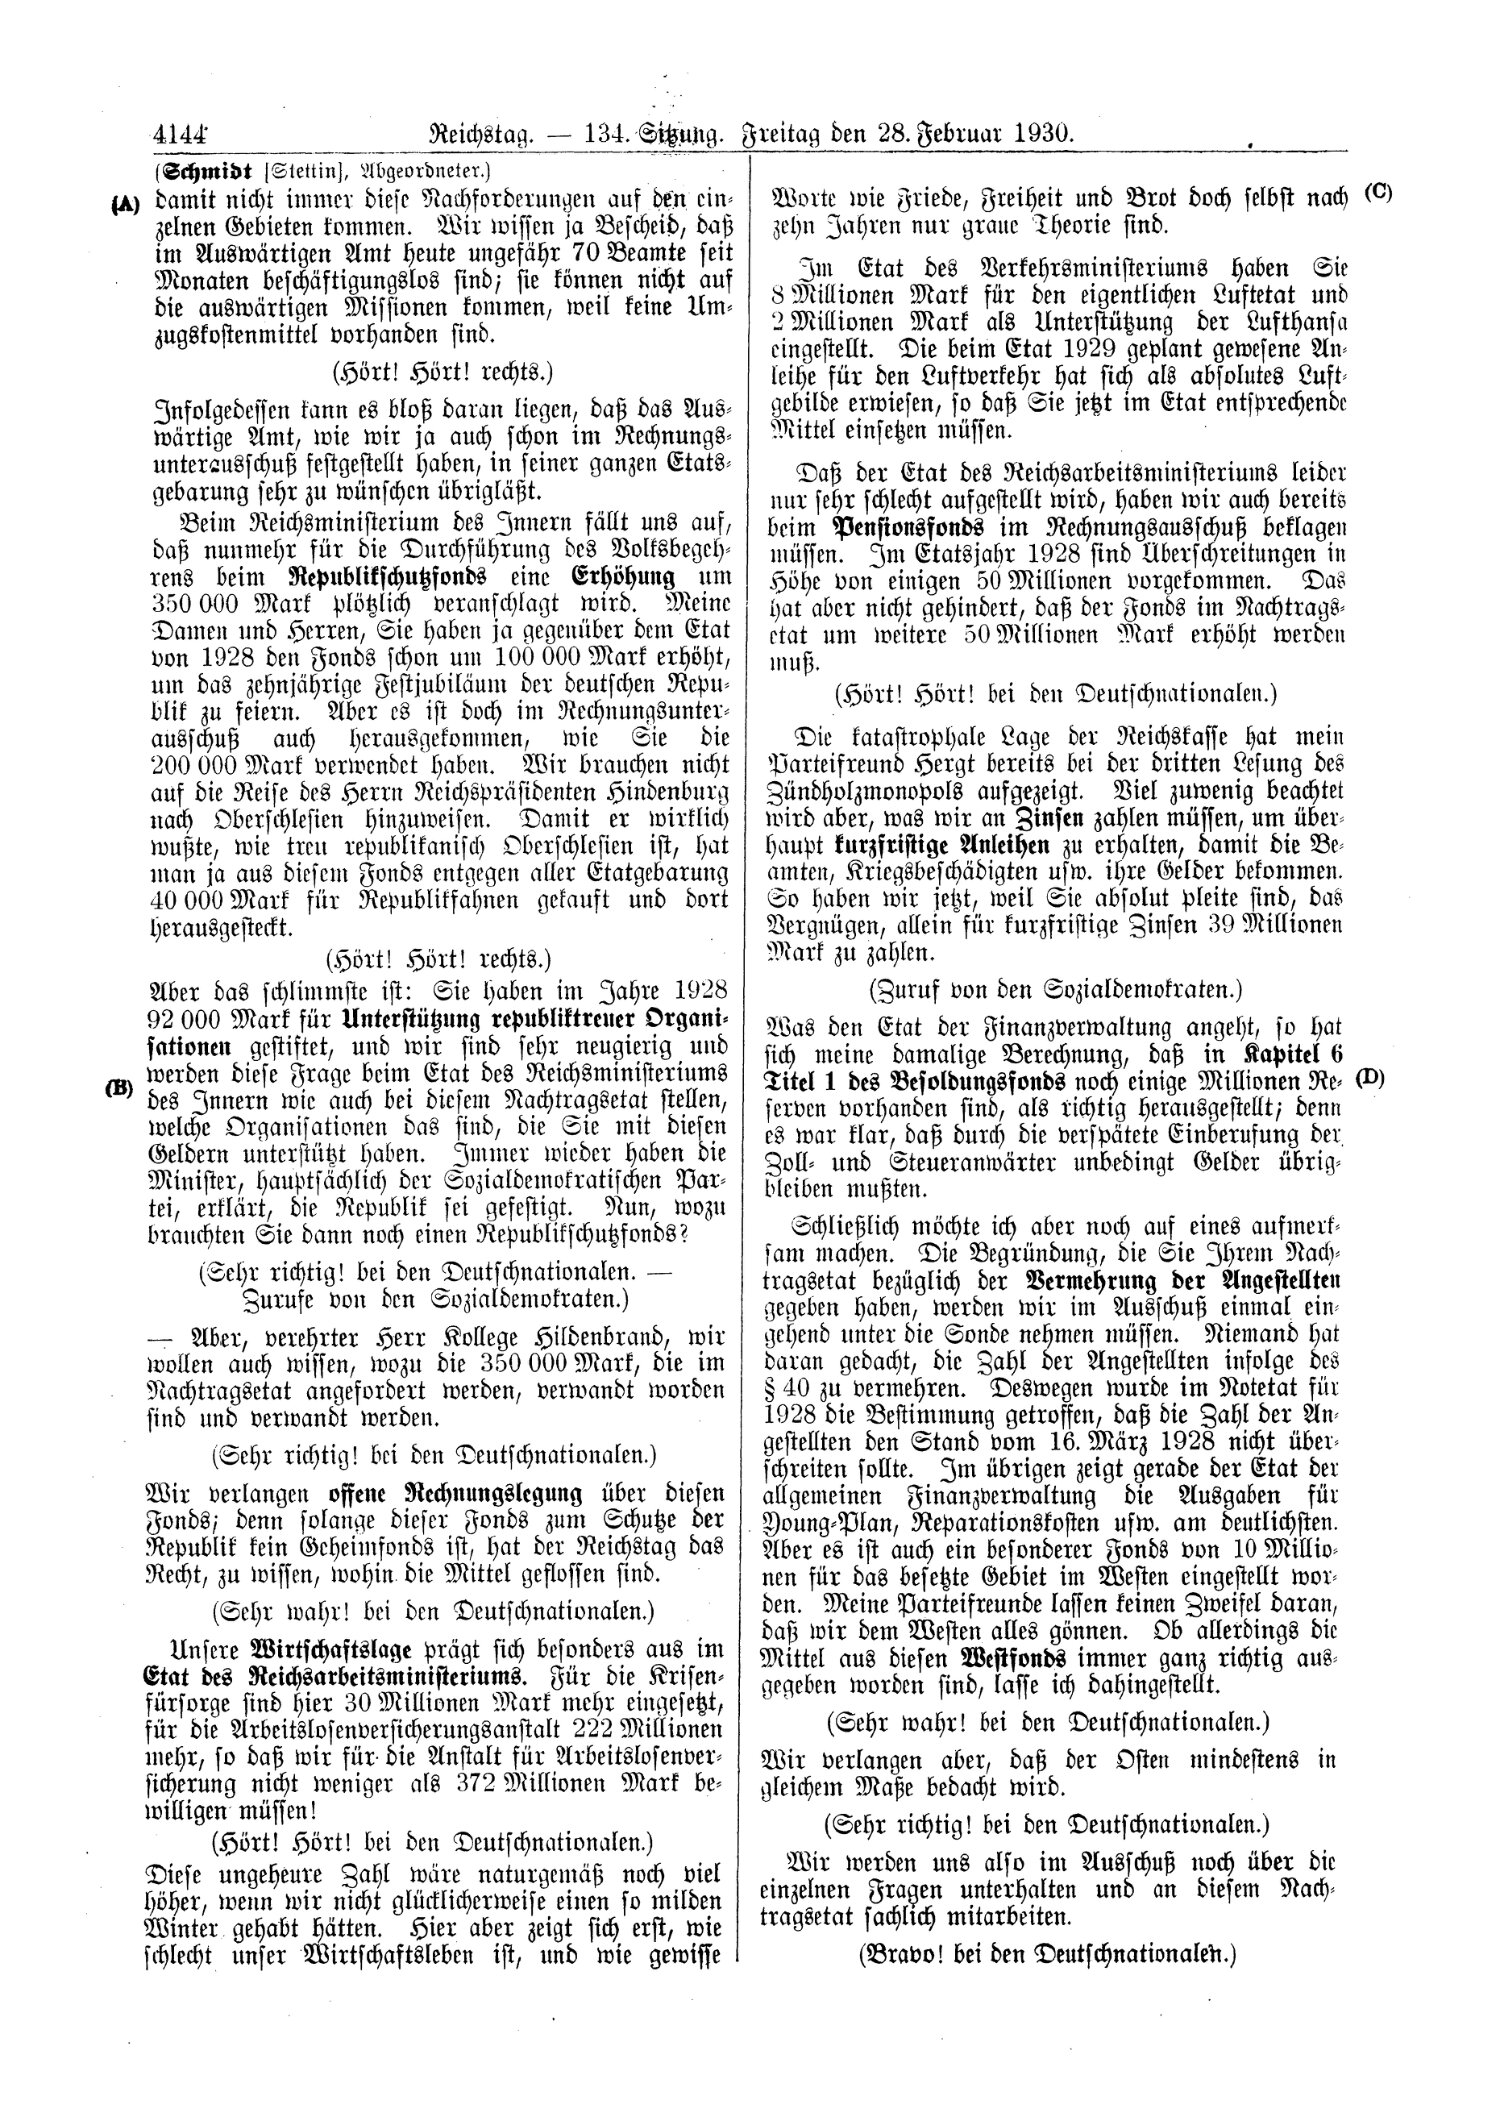 Scan of page 4144